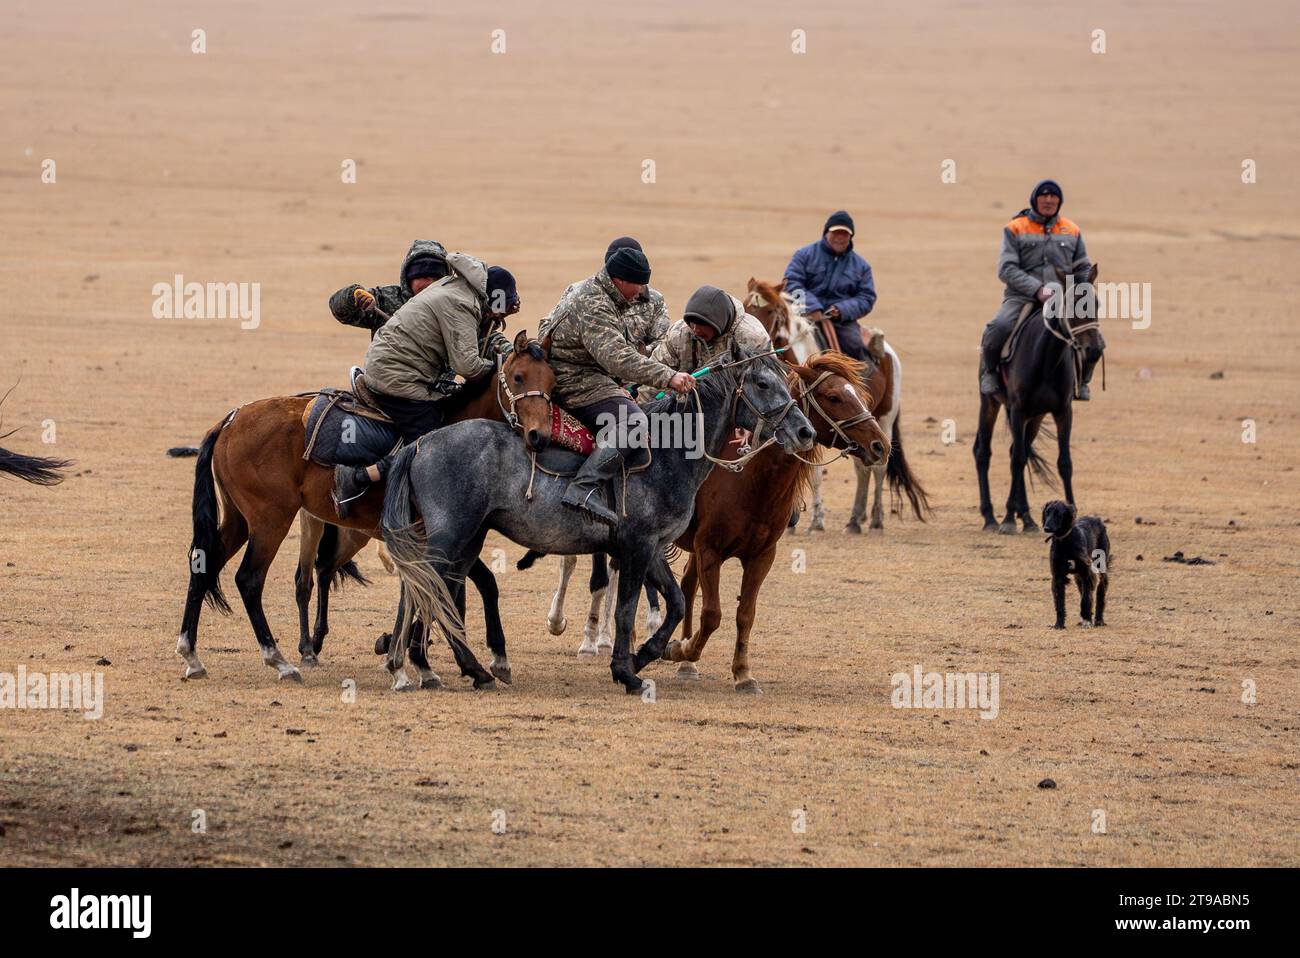 Buzkashi (goat pulling) is the national sport of Afghanistan It is a traditional sport in which horse-mounted players attempt to place a goat or calf Stock Photo